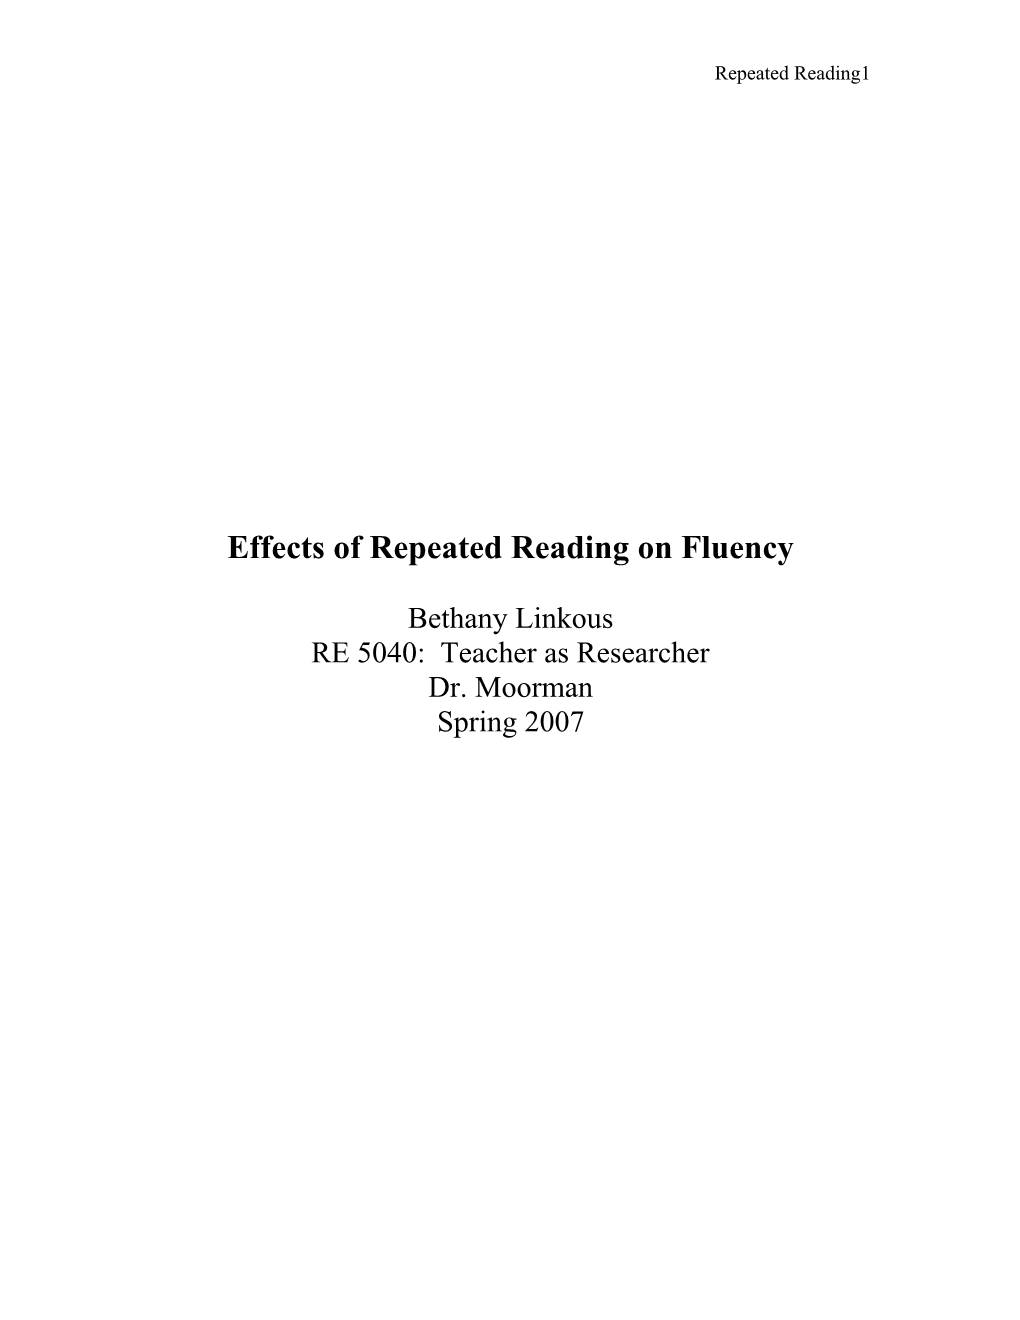 Effects of Repeated Reading on Fluency